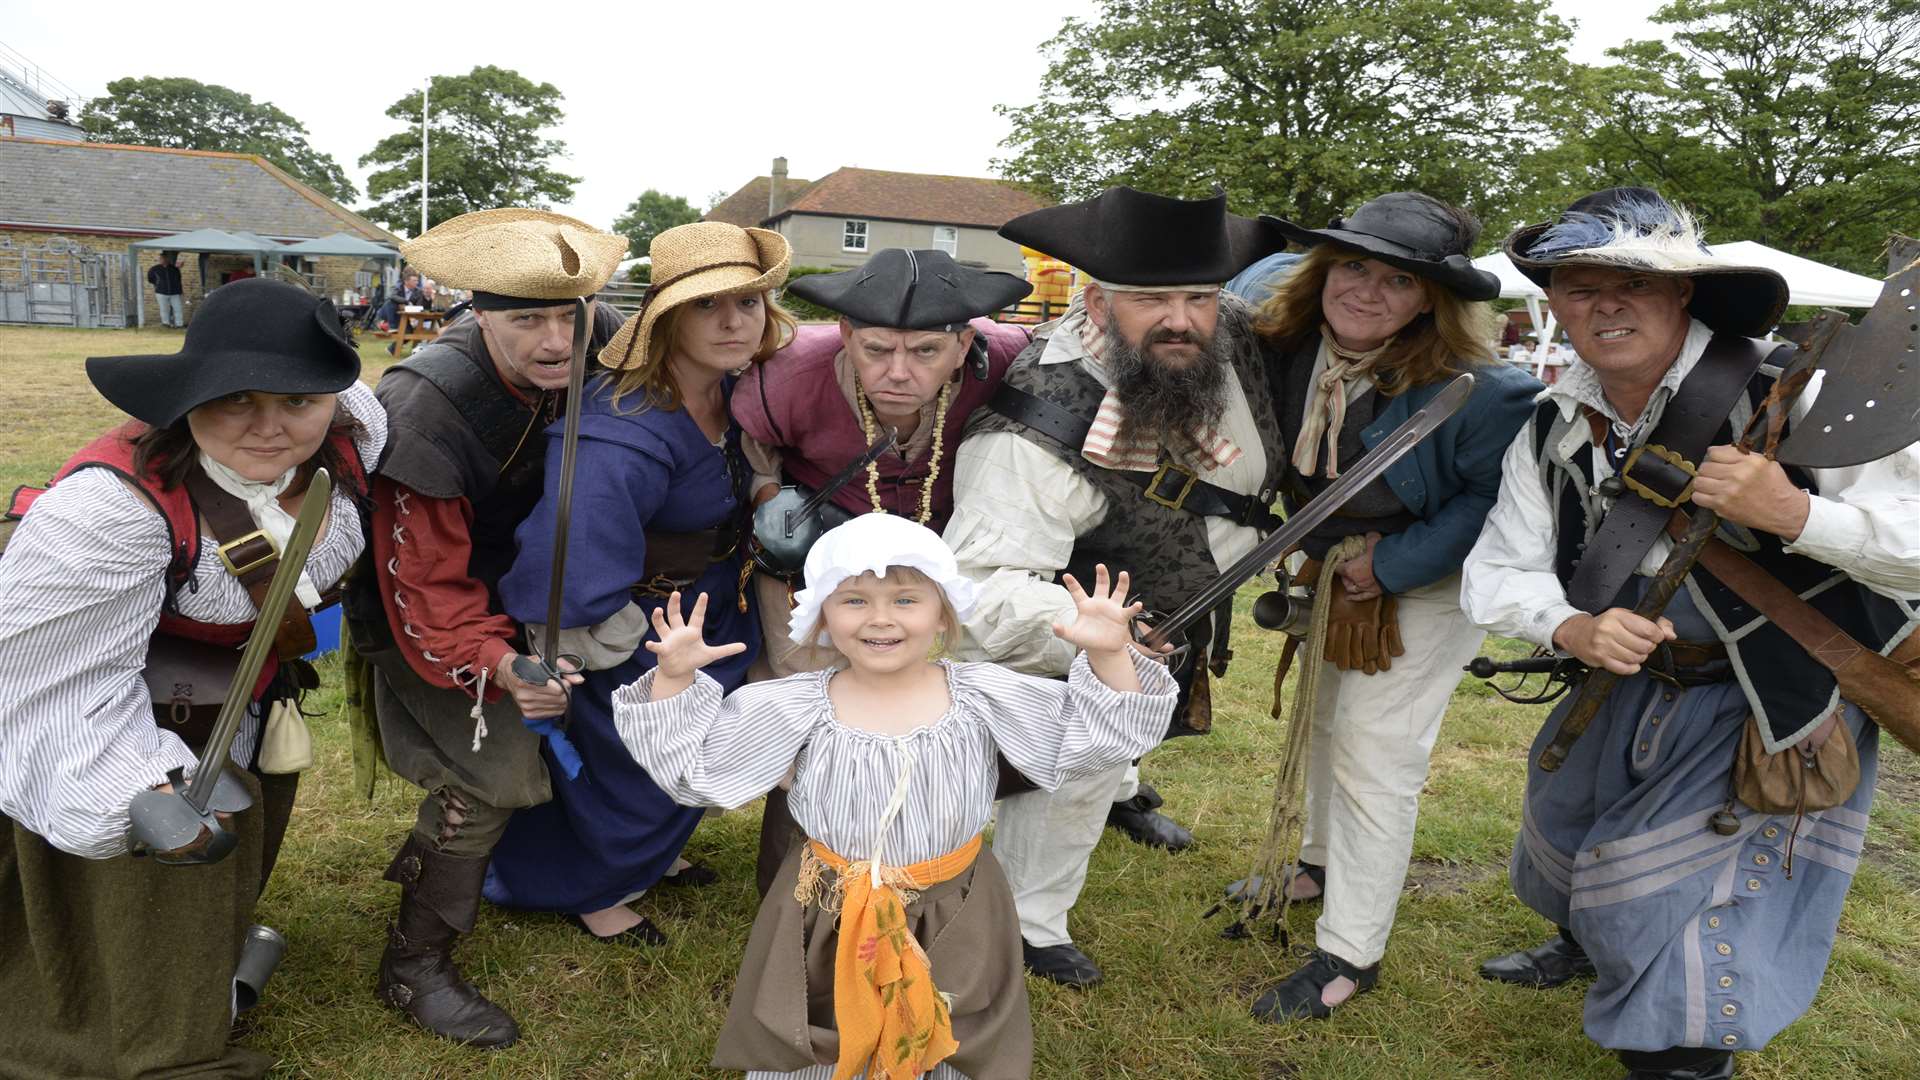 Topsail otherwise known as Emily Worthington, five is certainly not afraid of the Sheppey pirates, she's one of them, at the Holm Place Farm fun day